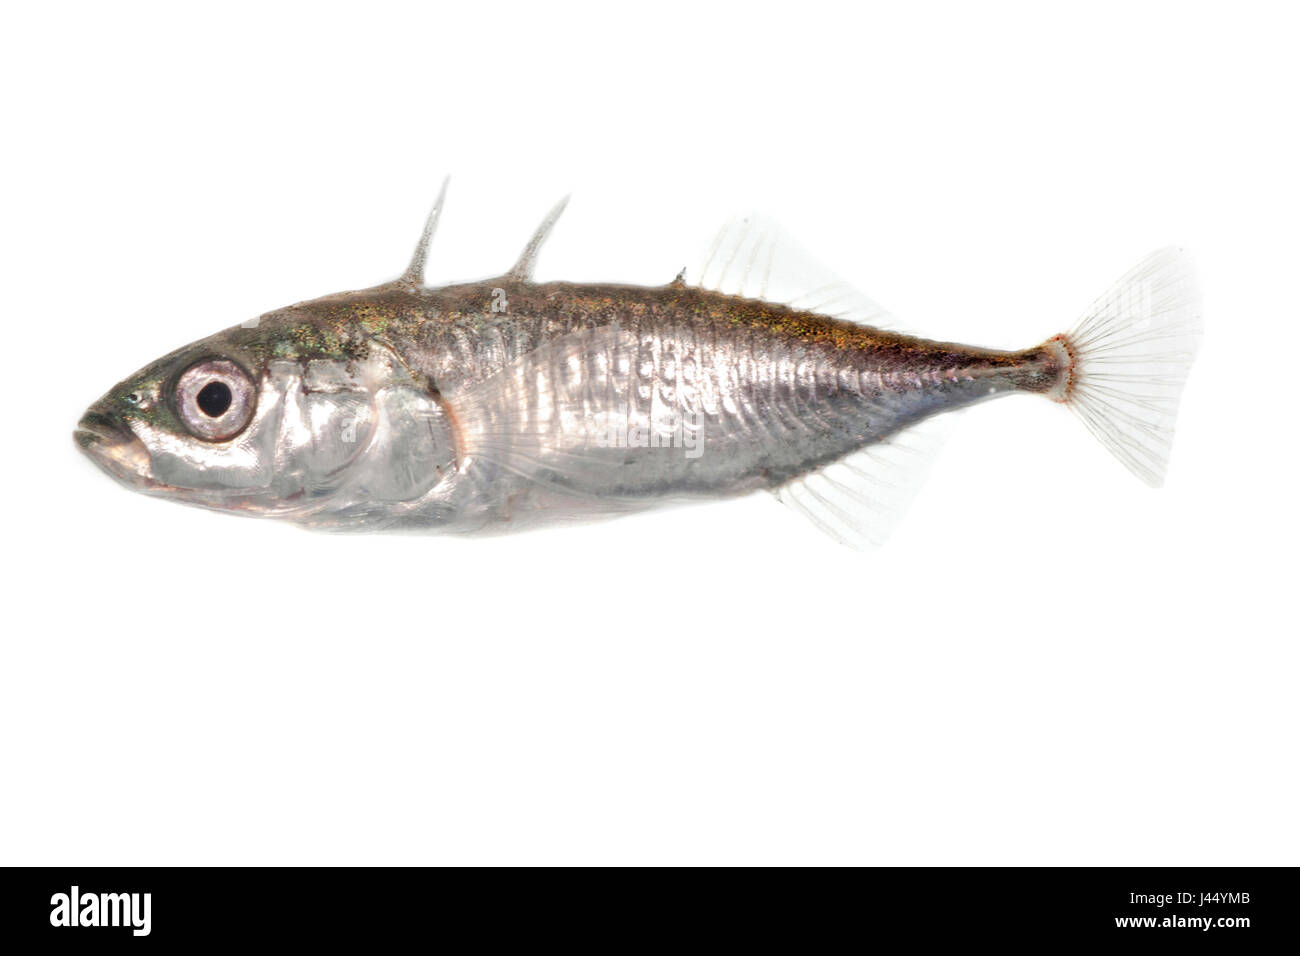 photo of stickleback against a white background Stock Photo